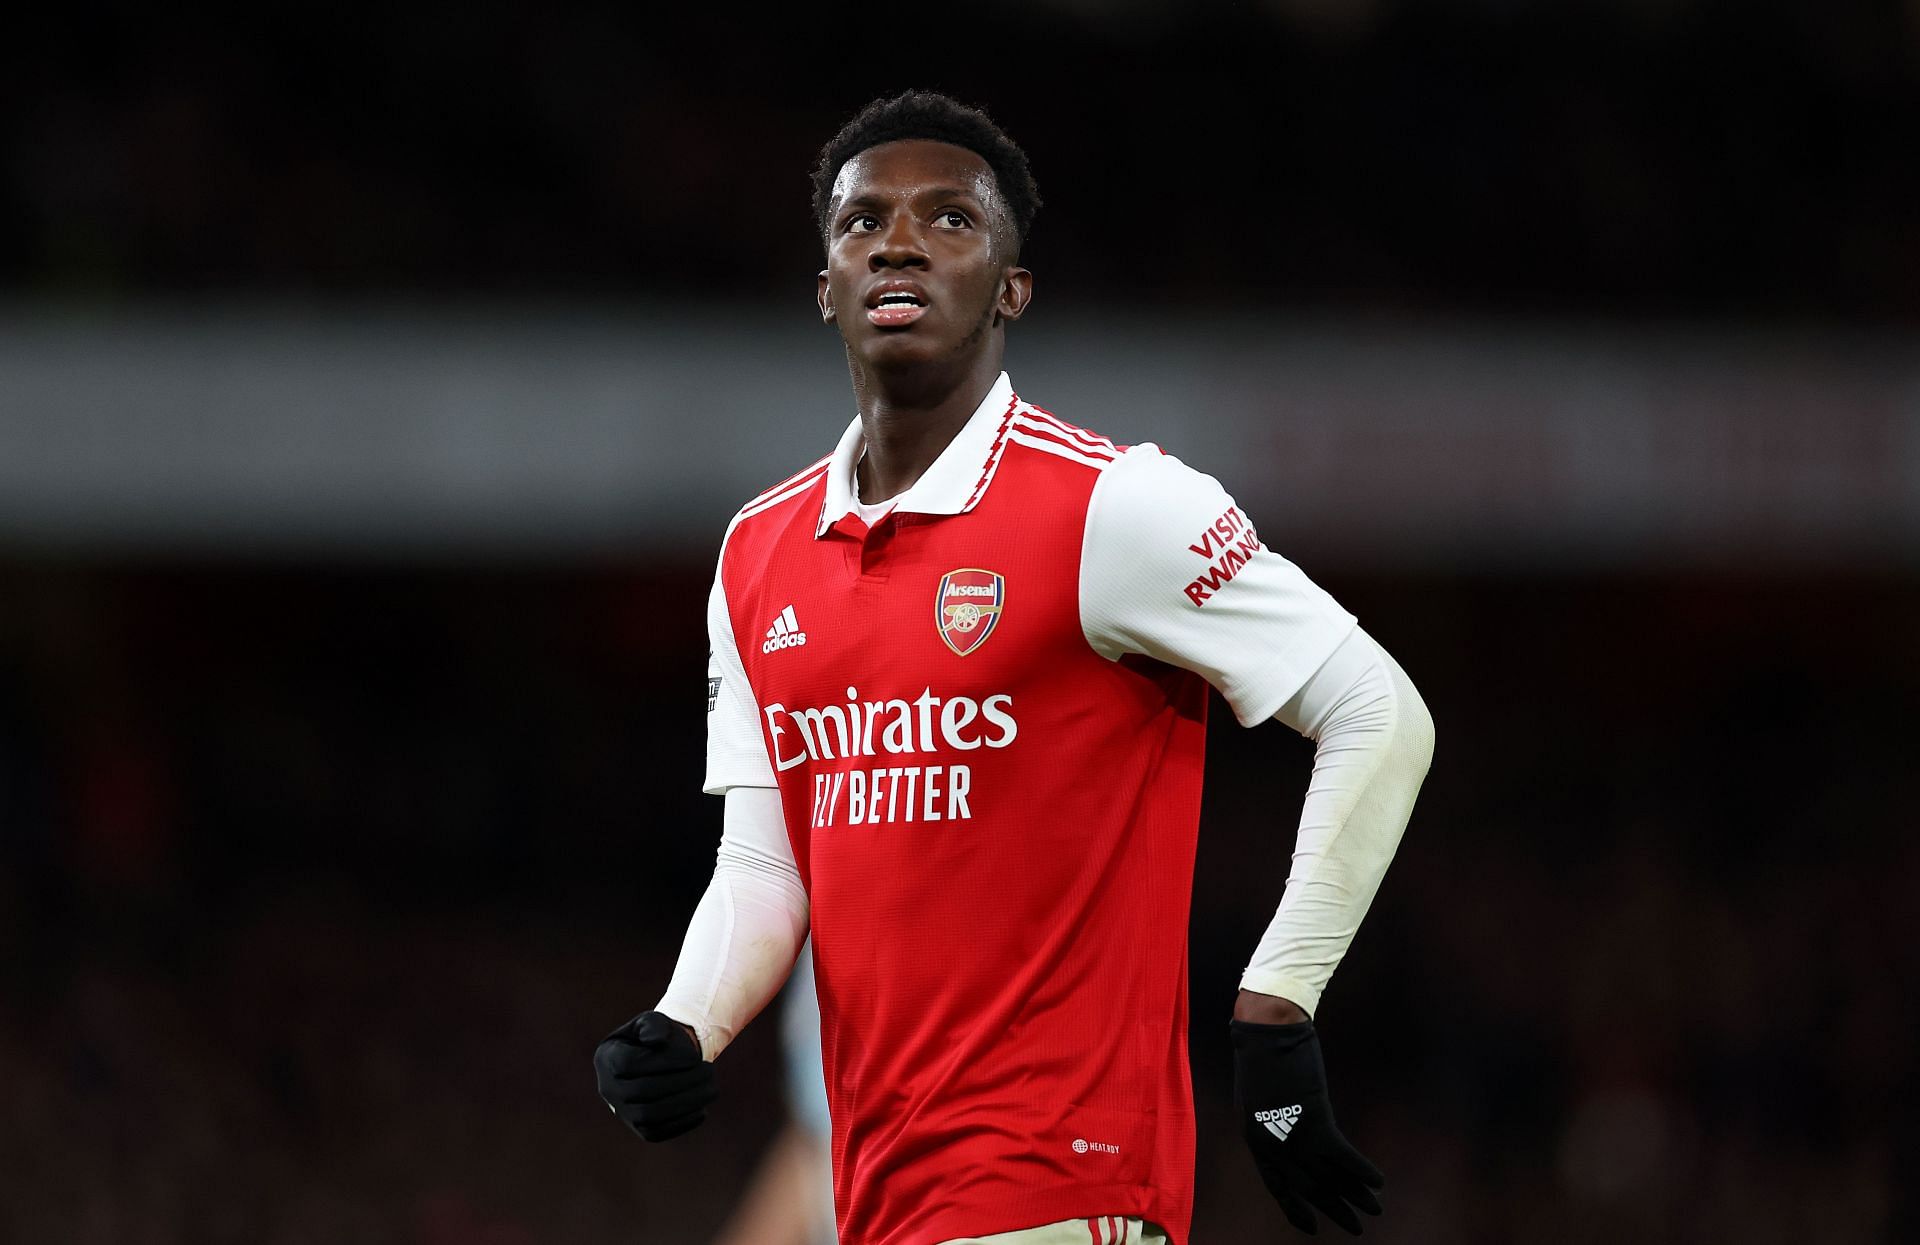 Eddie Nketiah has been thrust into action of late.